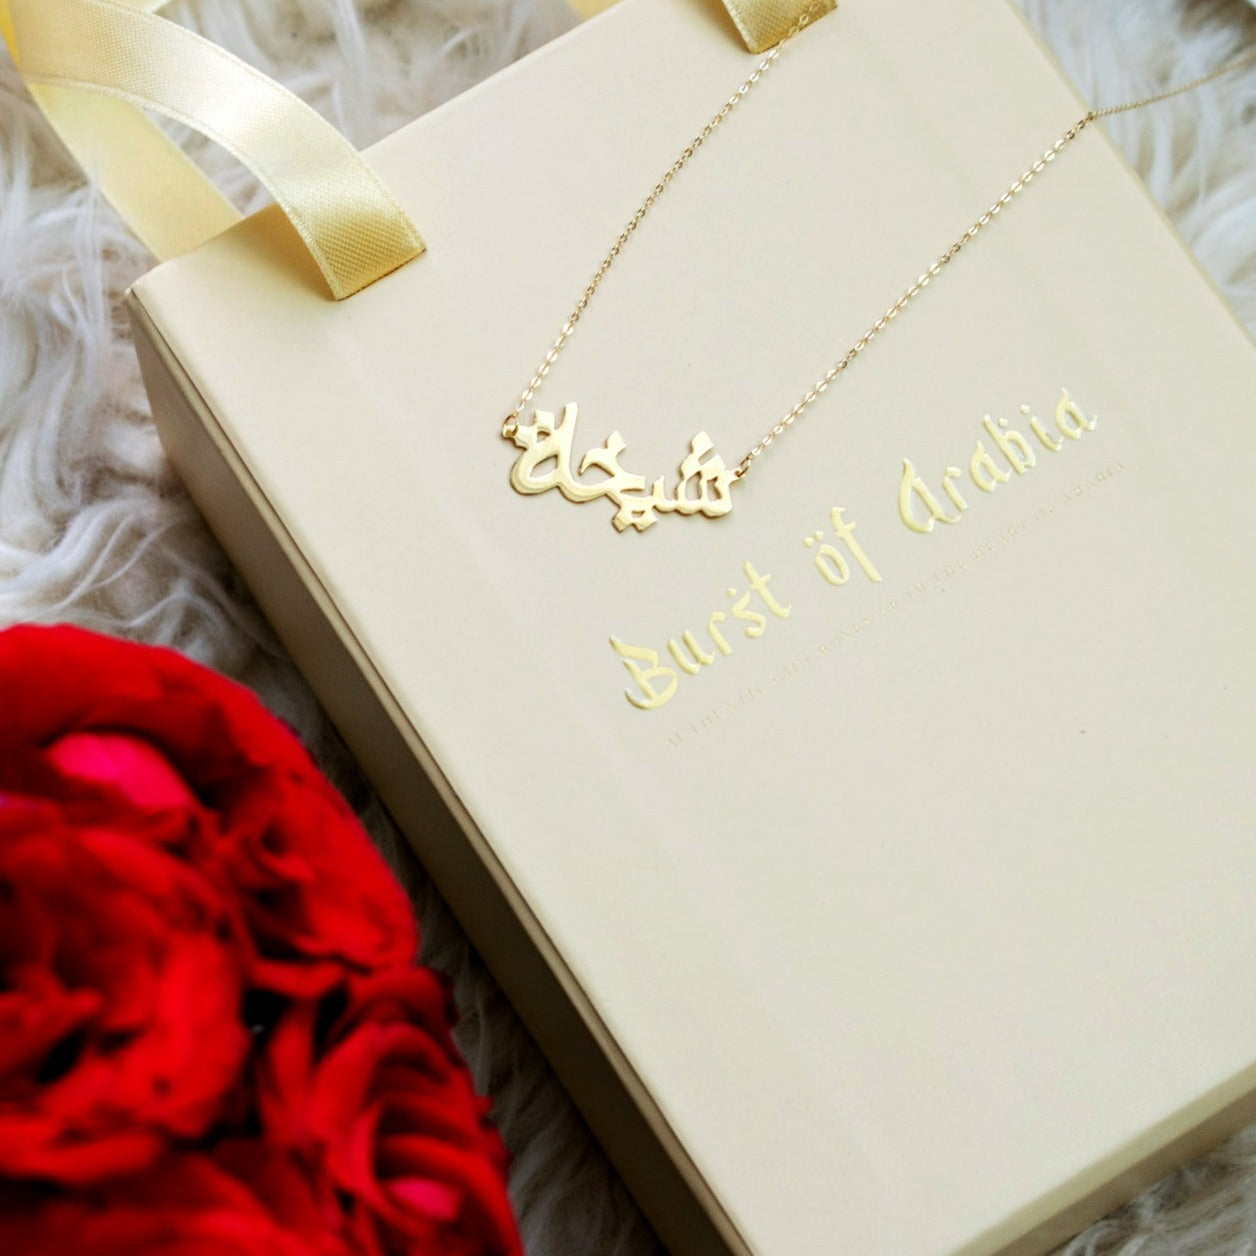 This personalized gold classic initial necklace is an ideal piece of customized jewelry that makes oneself stand out. It's also a thoughtful gift for the loved ones. Designed and handcrafted in Dubai, at the United Arab Emirates.